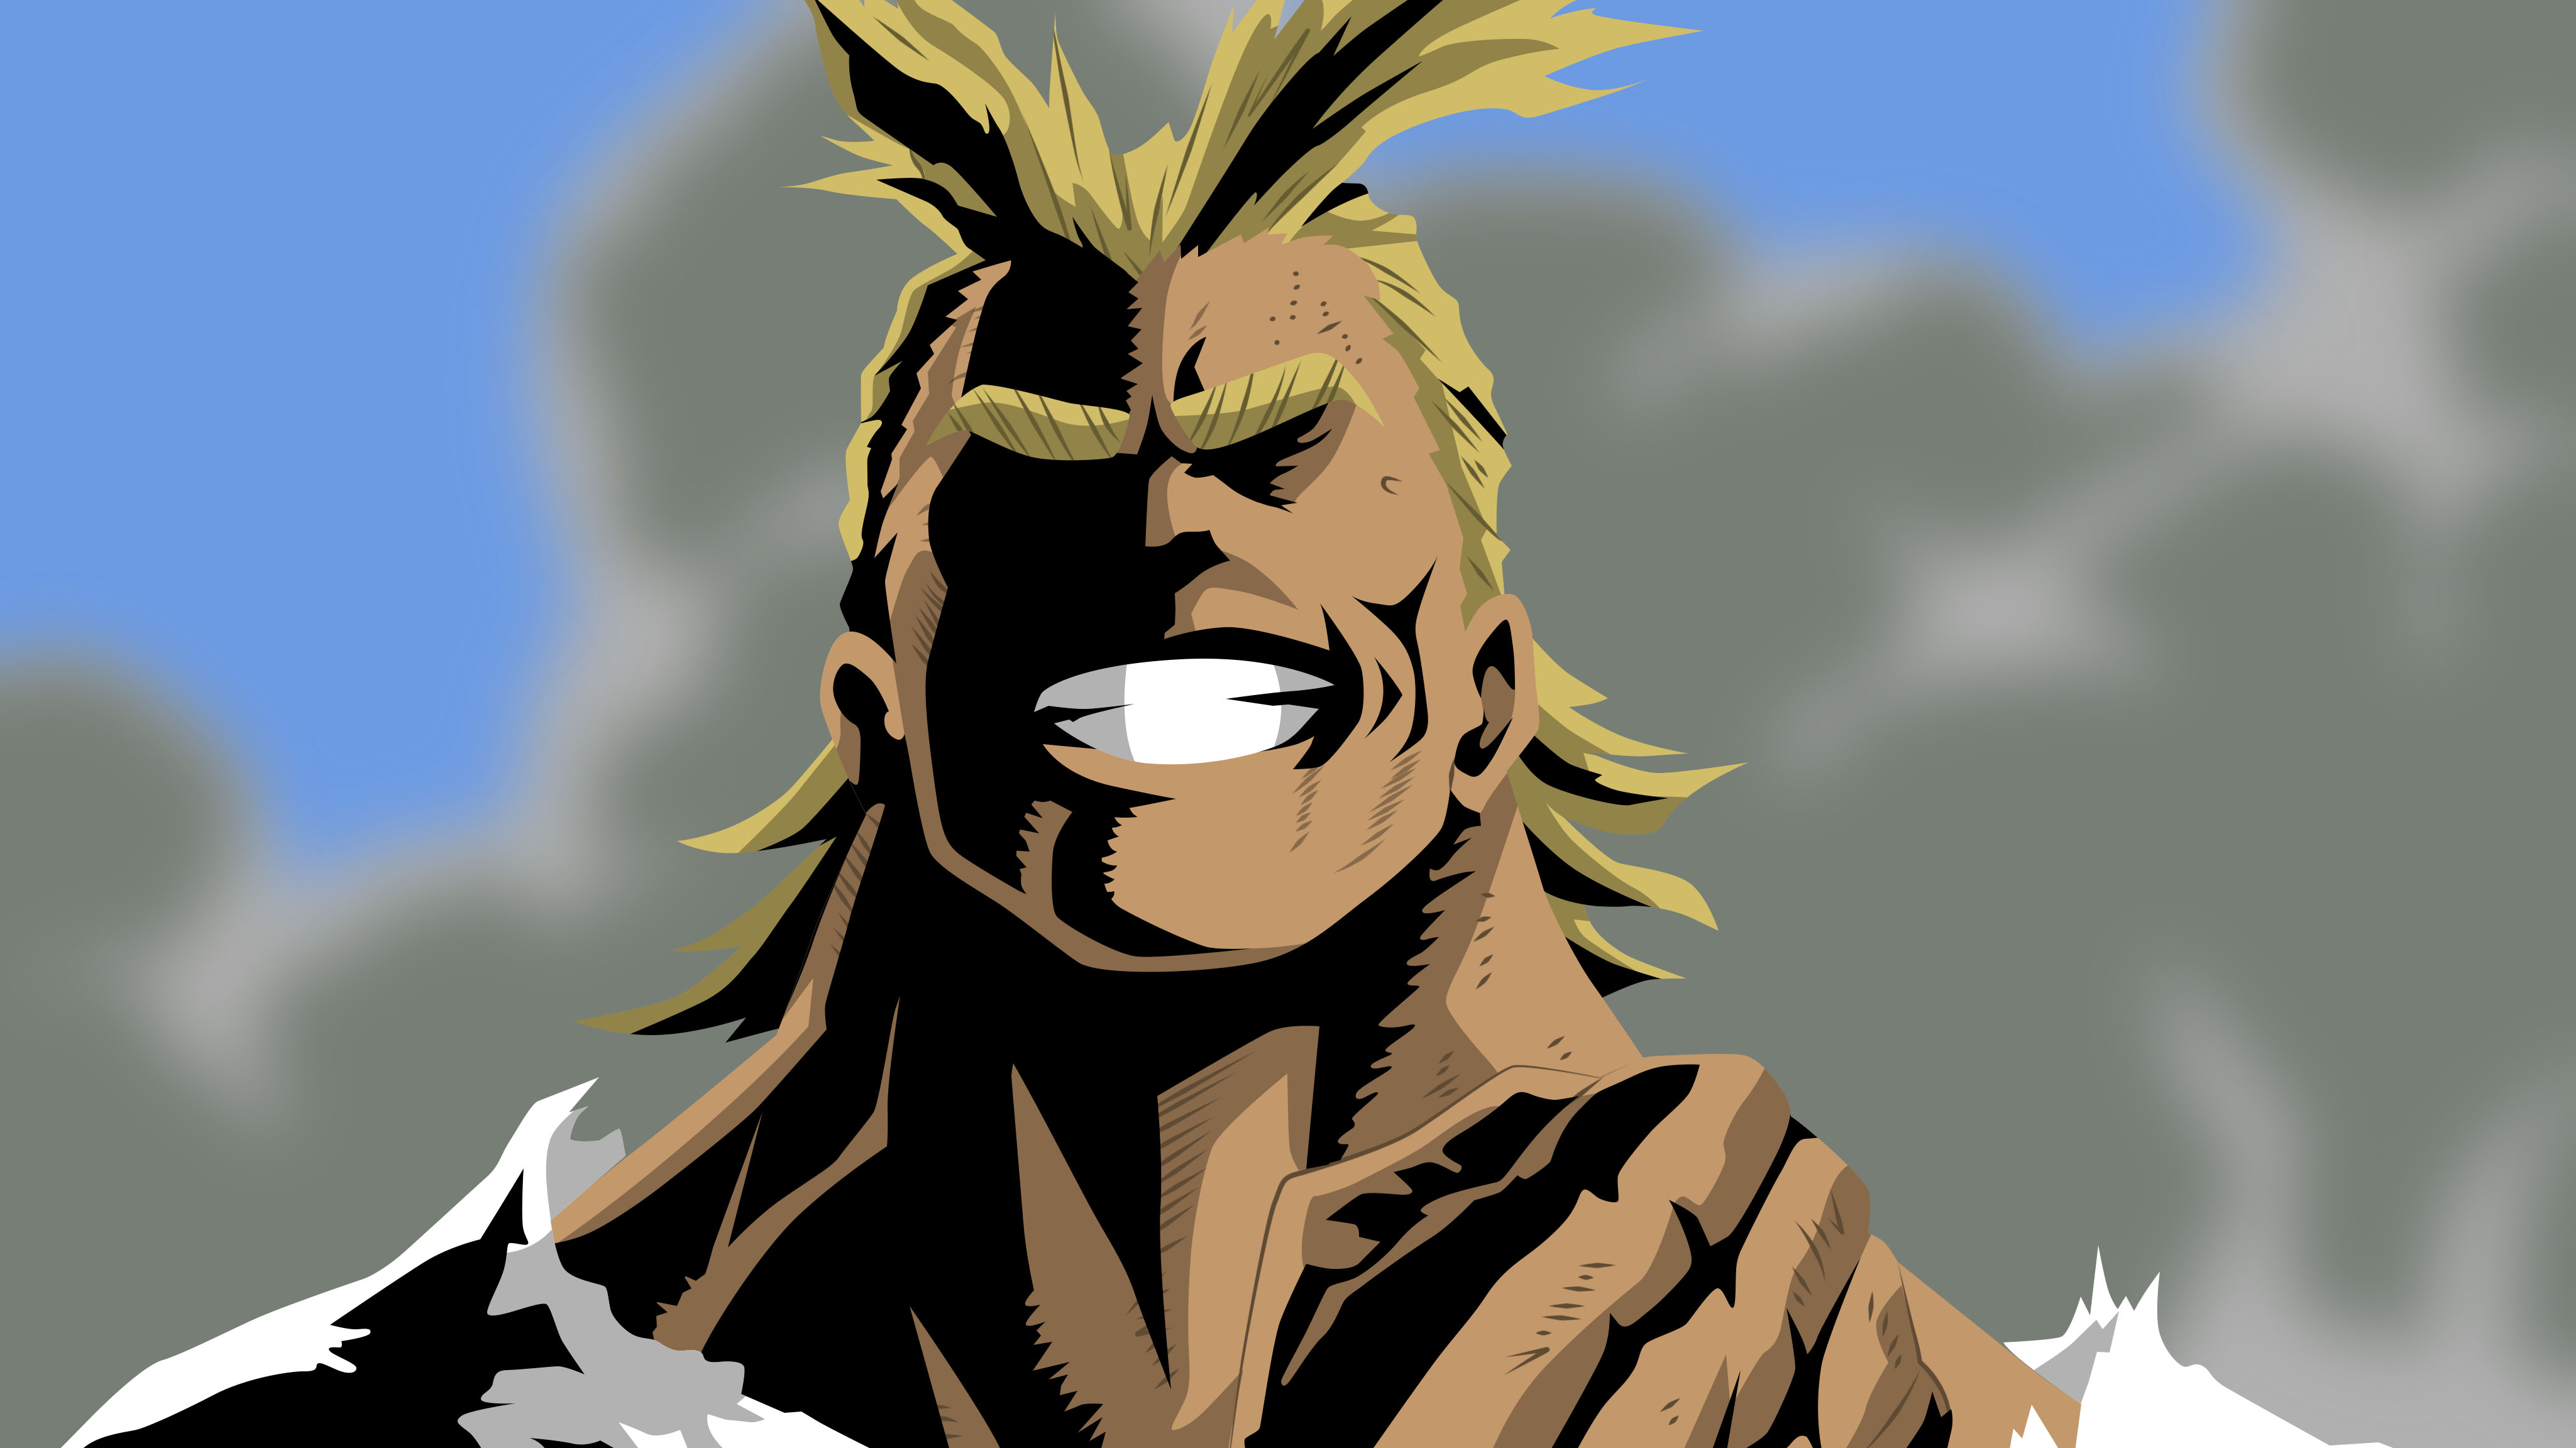 All Might 4098x2304